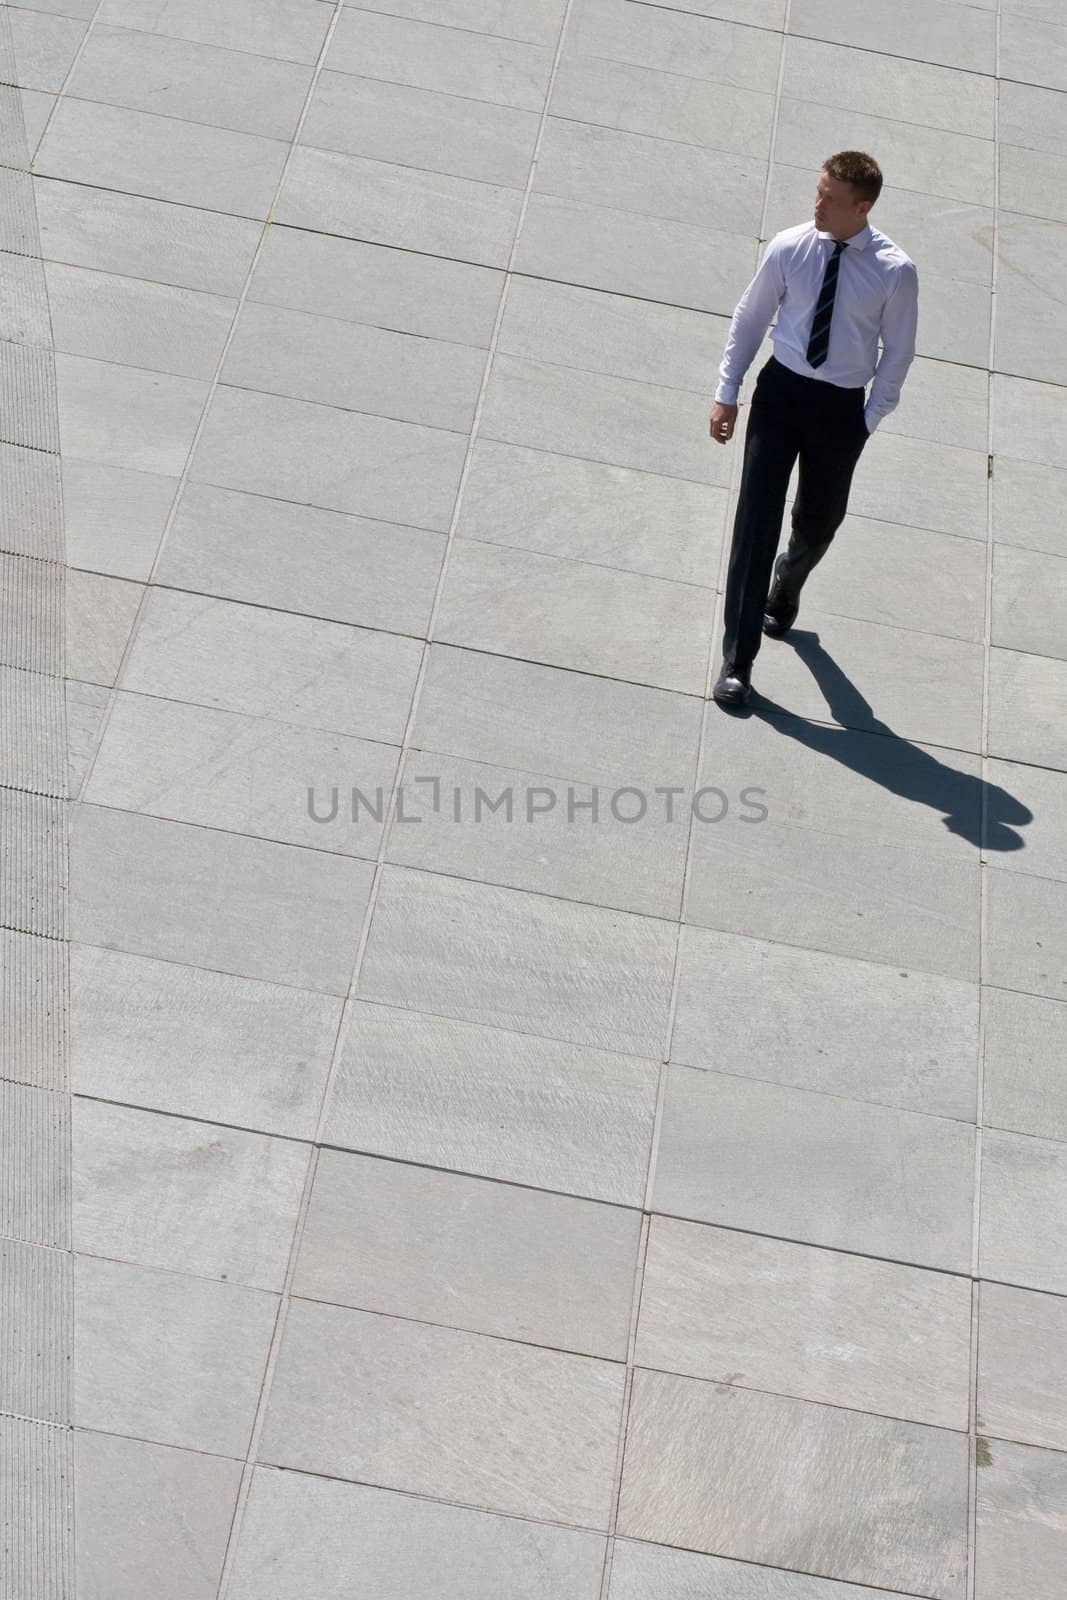 Young Corporate Man Walking On Pavement With His Hand In His Pocket